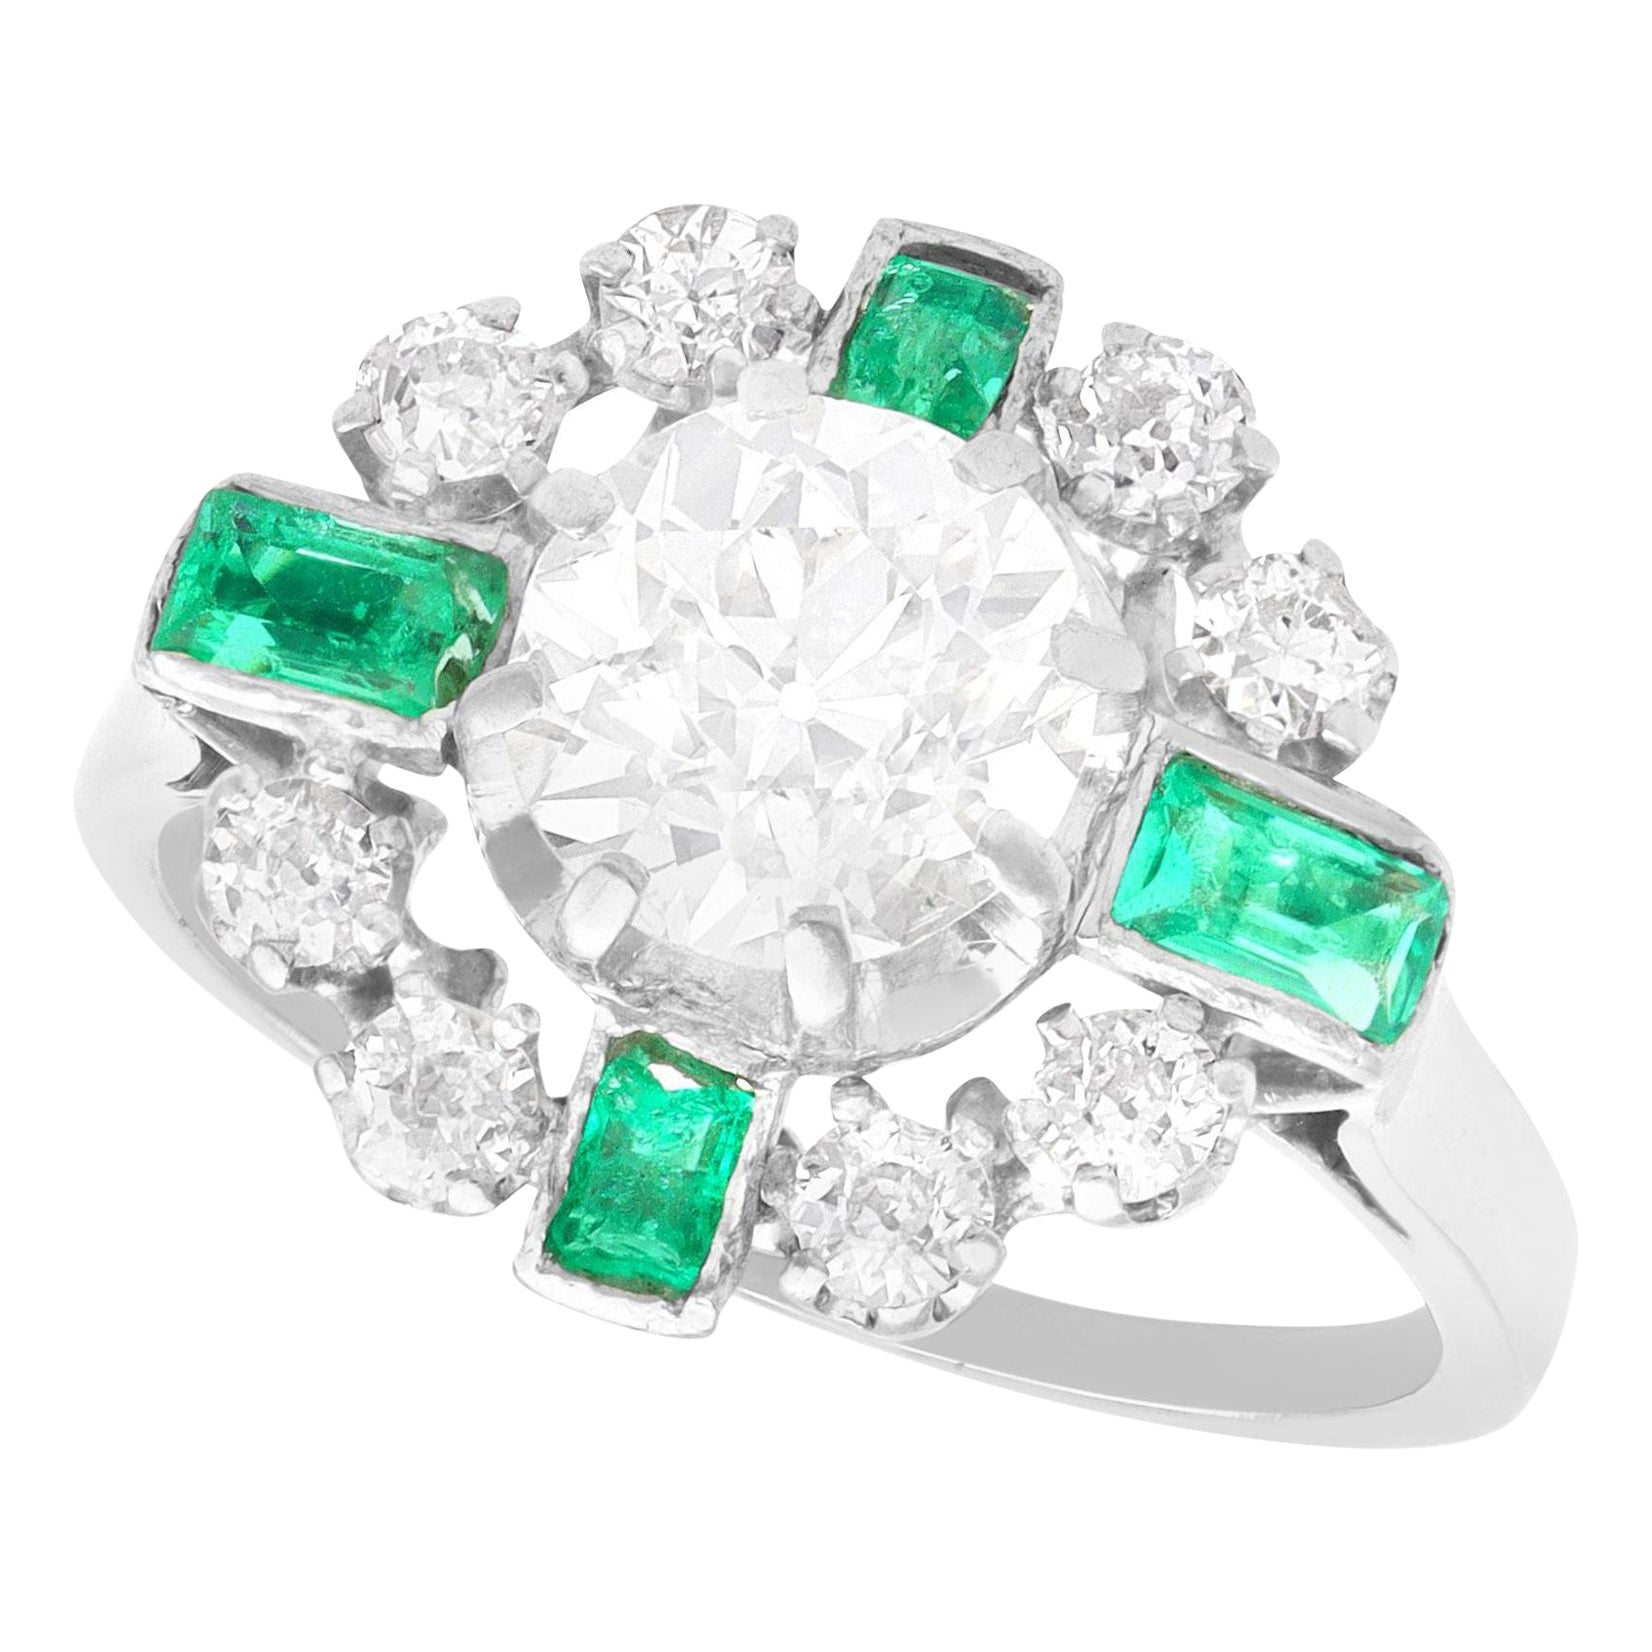 1950s French 2.06 Carat Diamond and Emerald White Gold Cocktail Ring For Sale